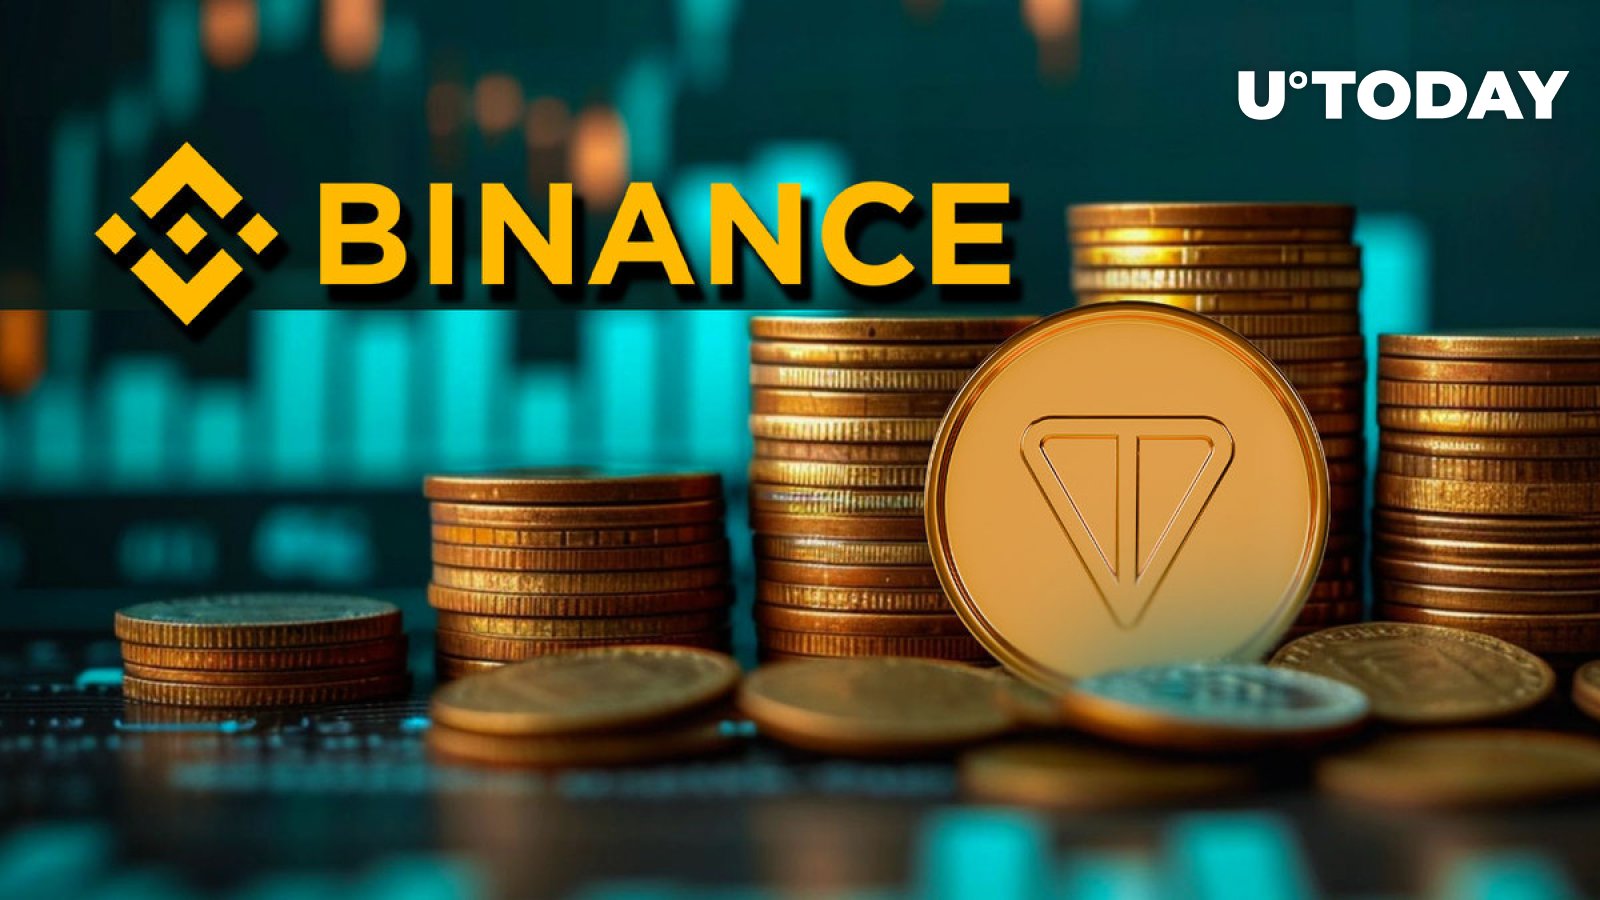 USDT on Toncoin (TON) Officially Goes Live on Binance: Details